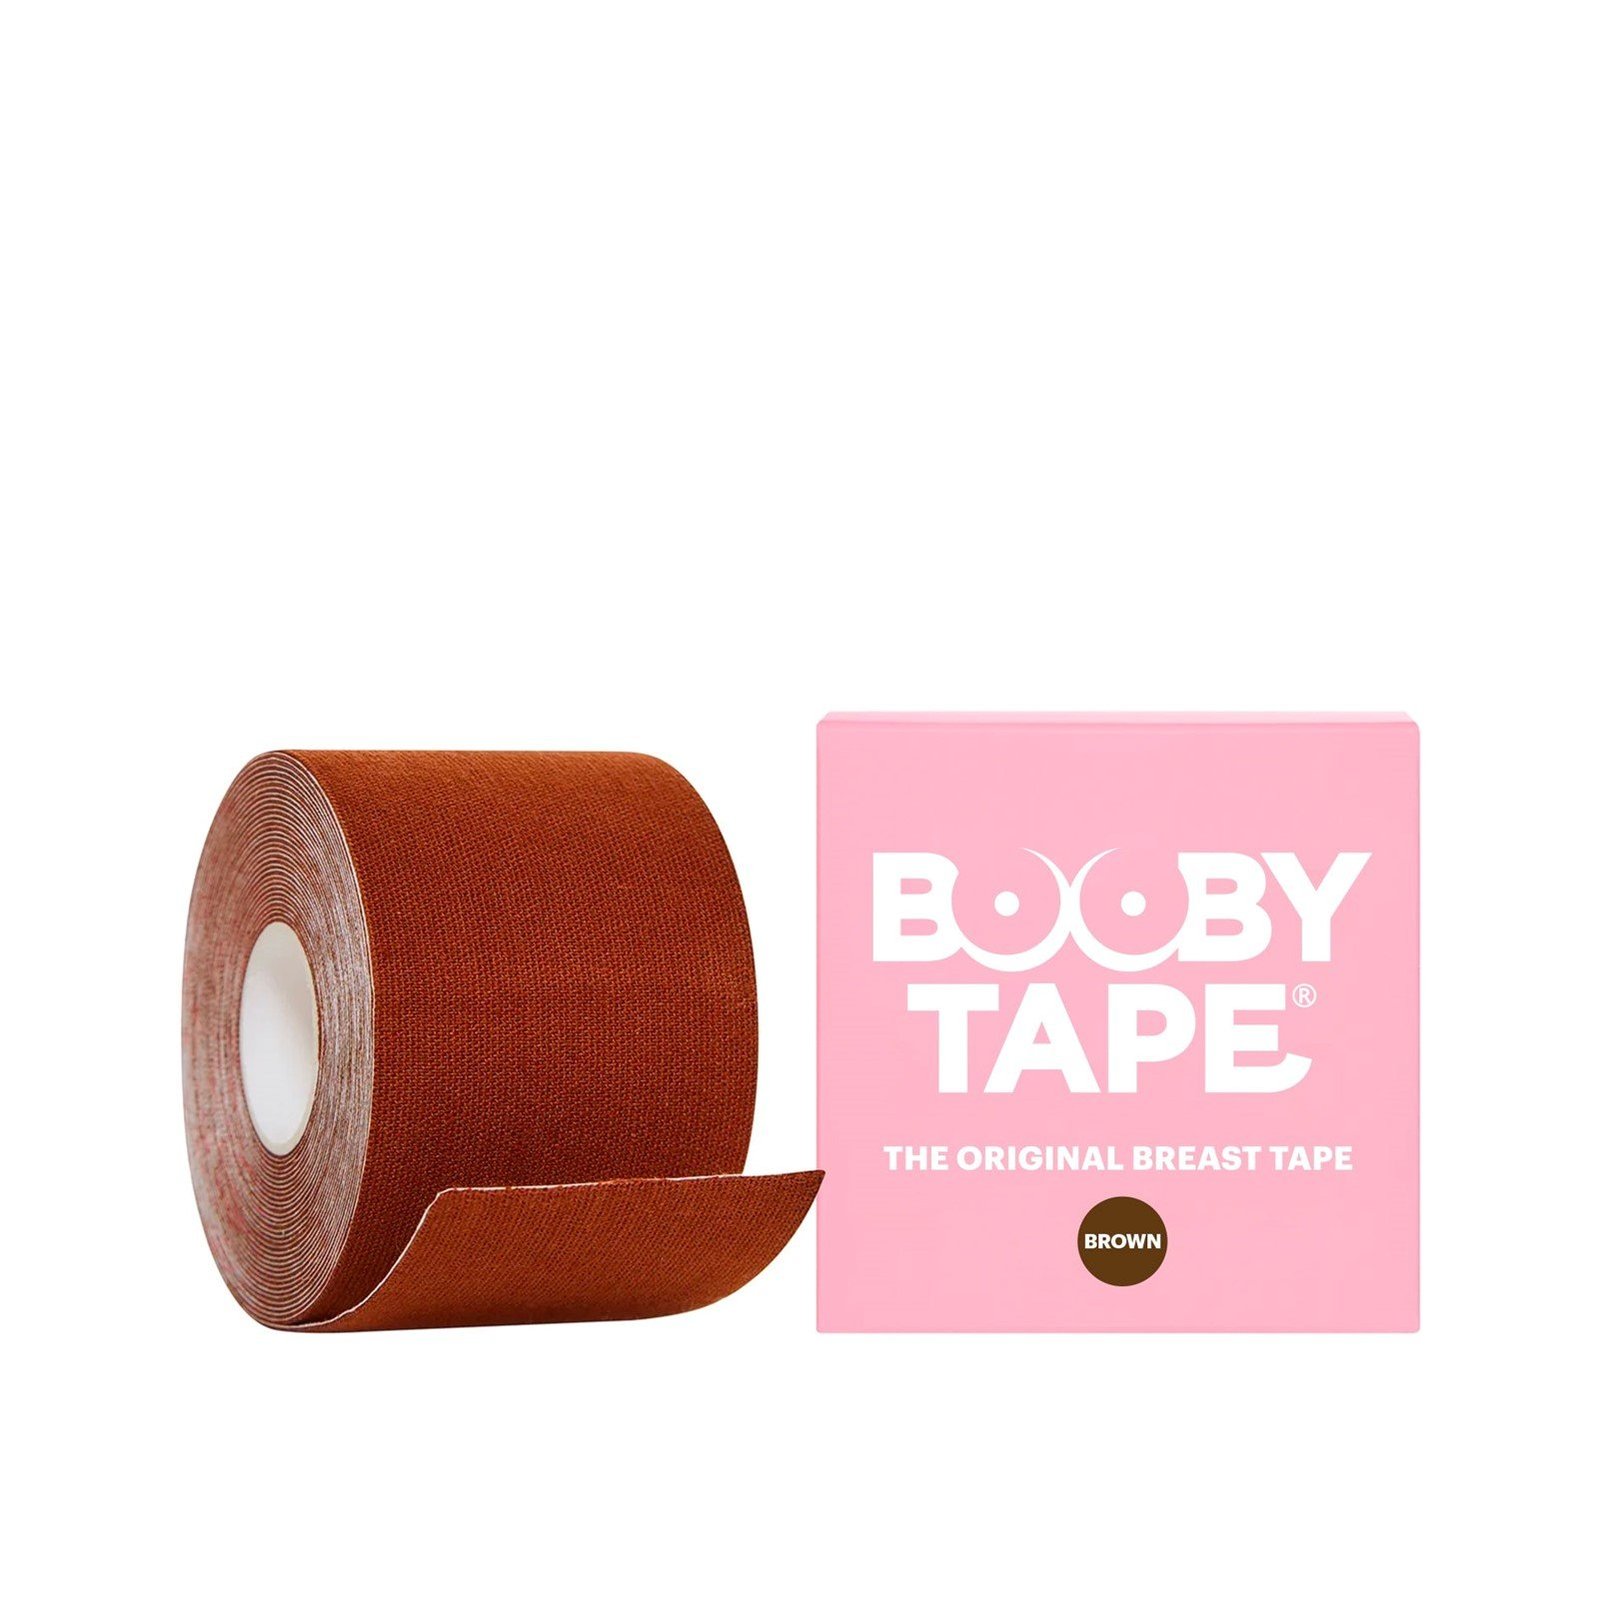 Booby Tape The Original Breast Tape Brown 5m (5.46 yd)